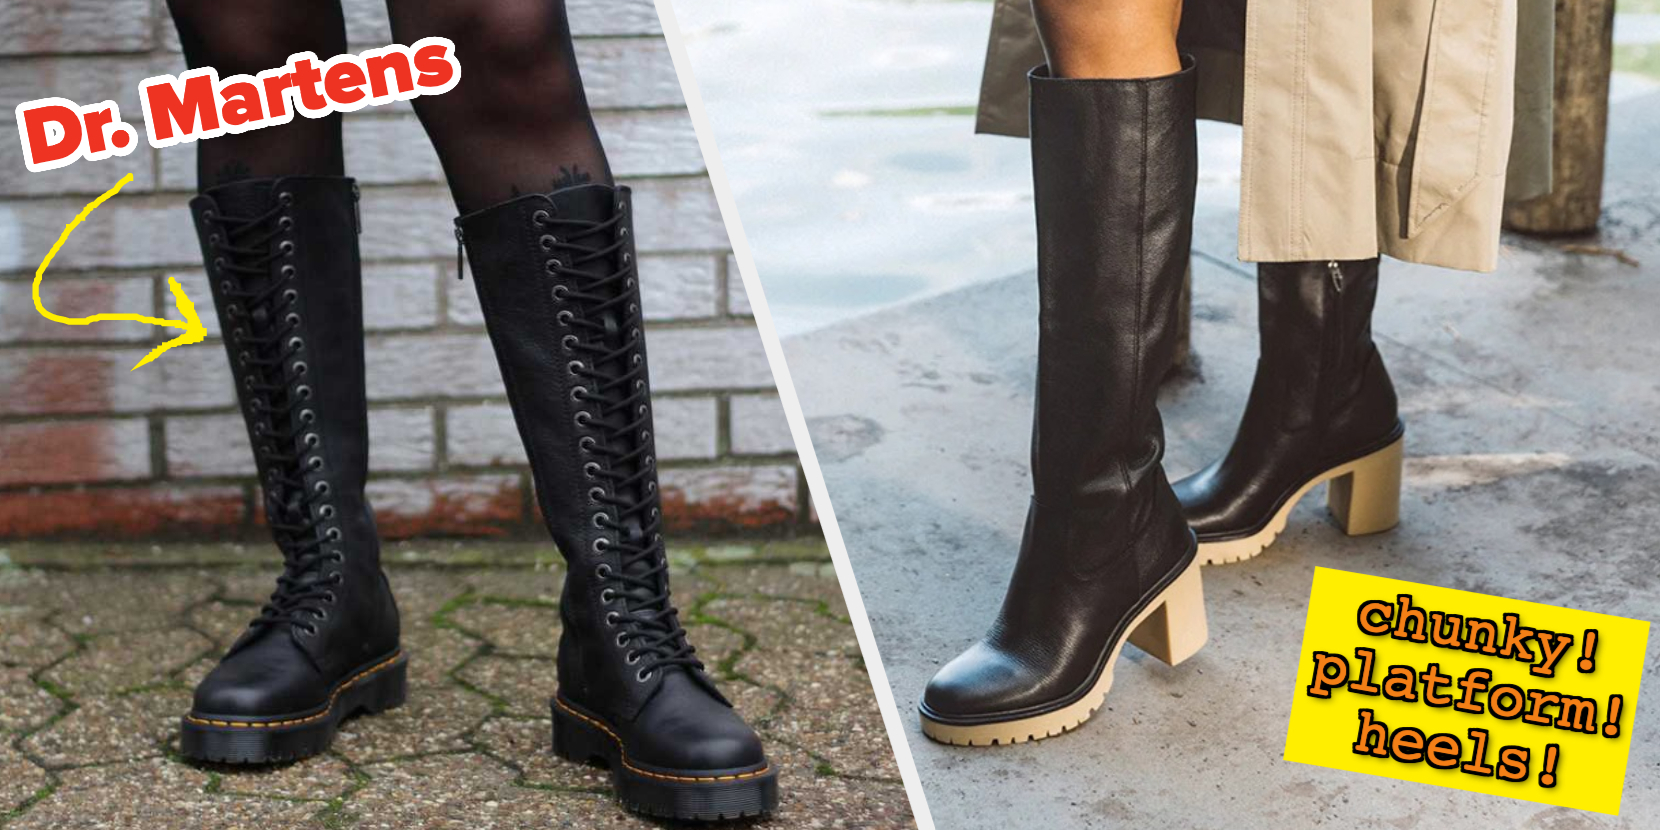  Other Stories Leather Platform Knee High Boots